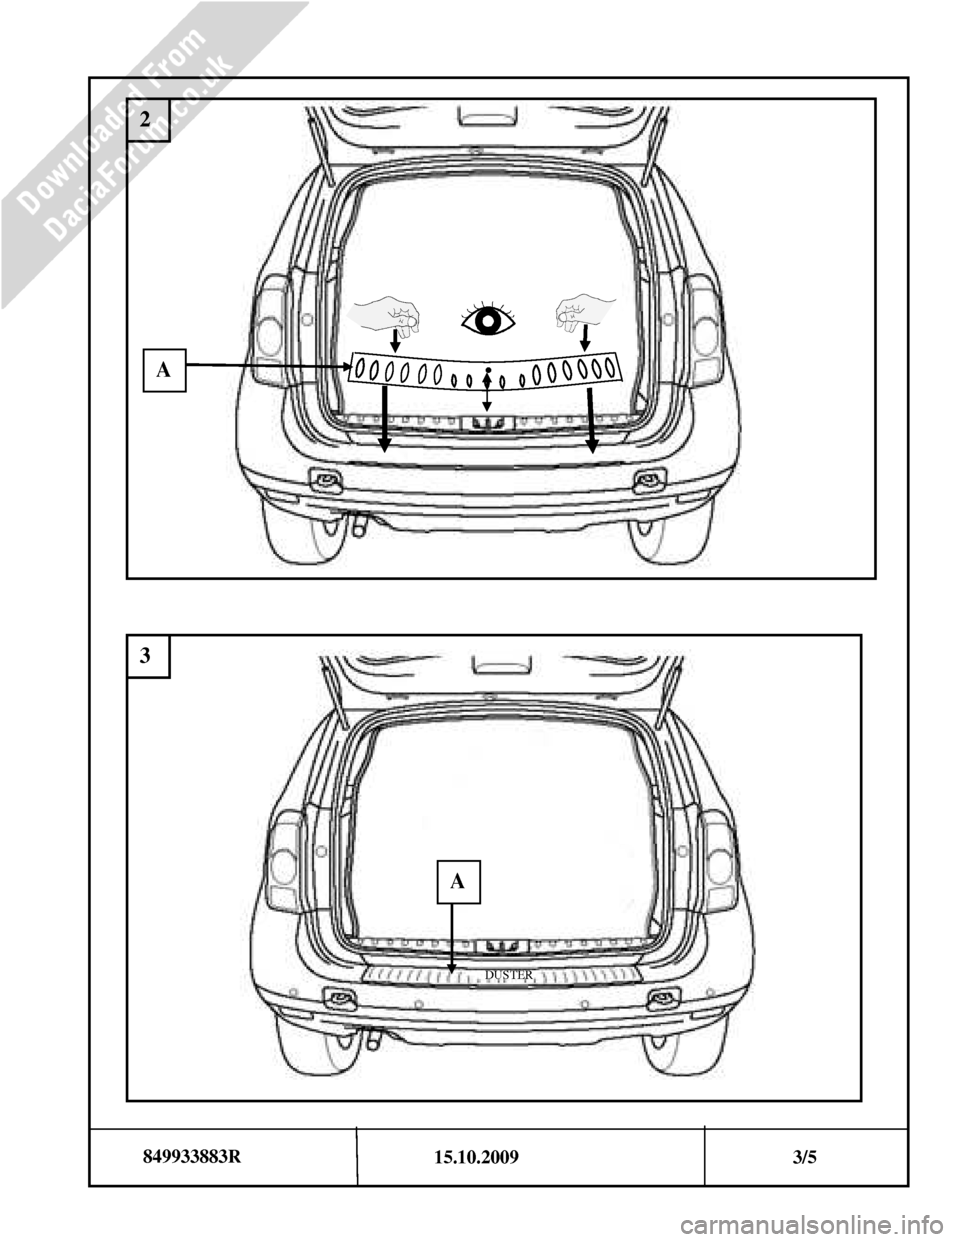 DACIA DUSTER 2010 1.G Bootlip Protector Fitting Guide Workshop Manual                                                         15.10.2009  3/5  
849933883R 
 
DUSTER 
. 
2 
3 
A 
A       